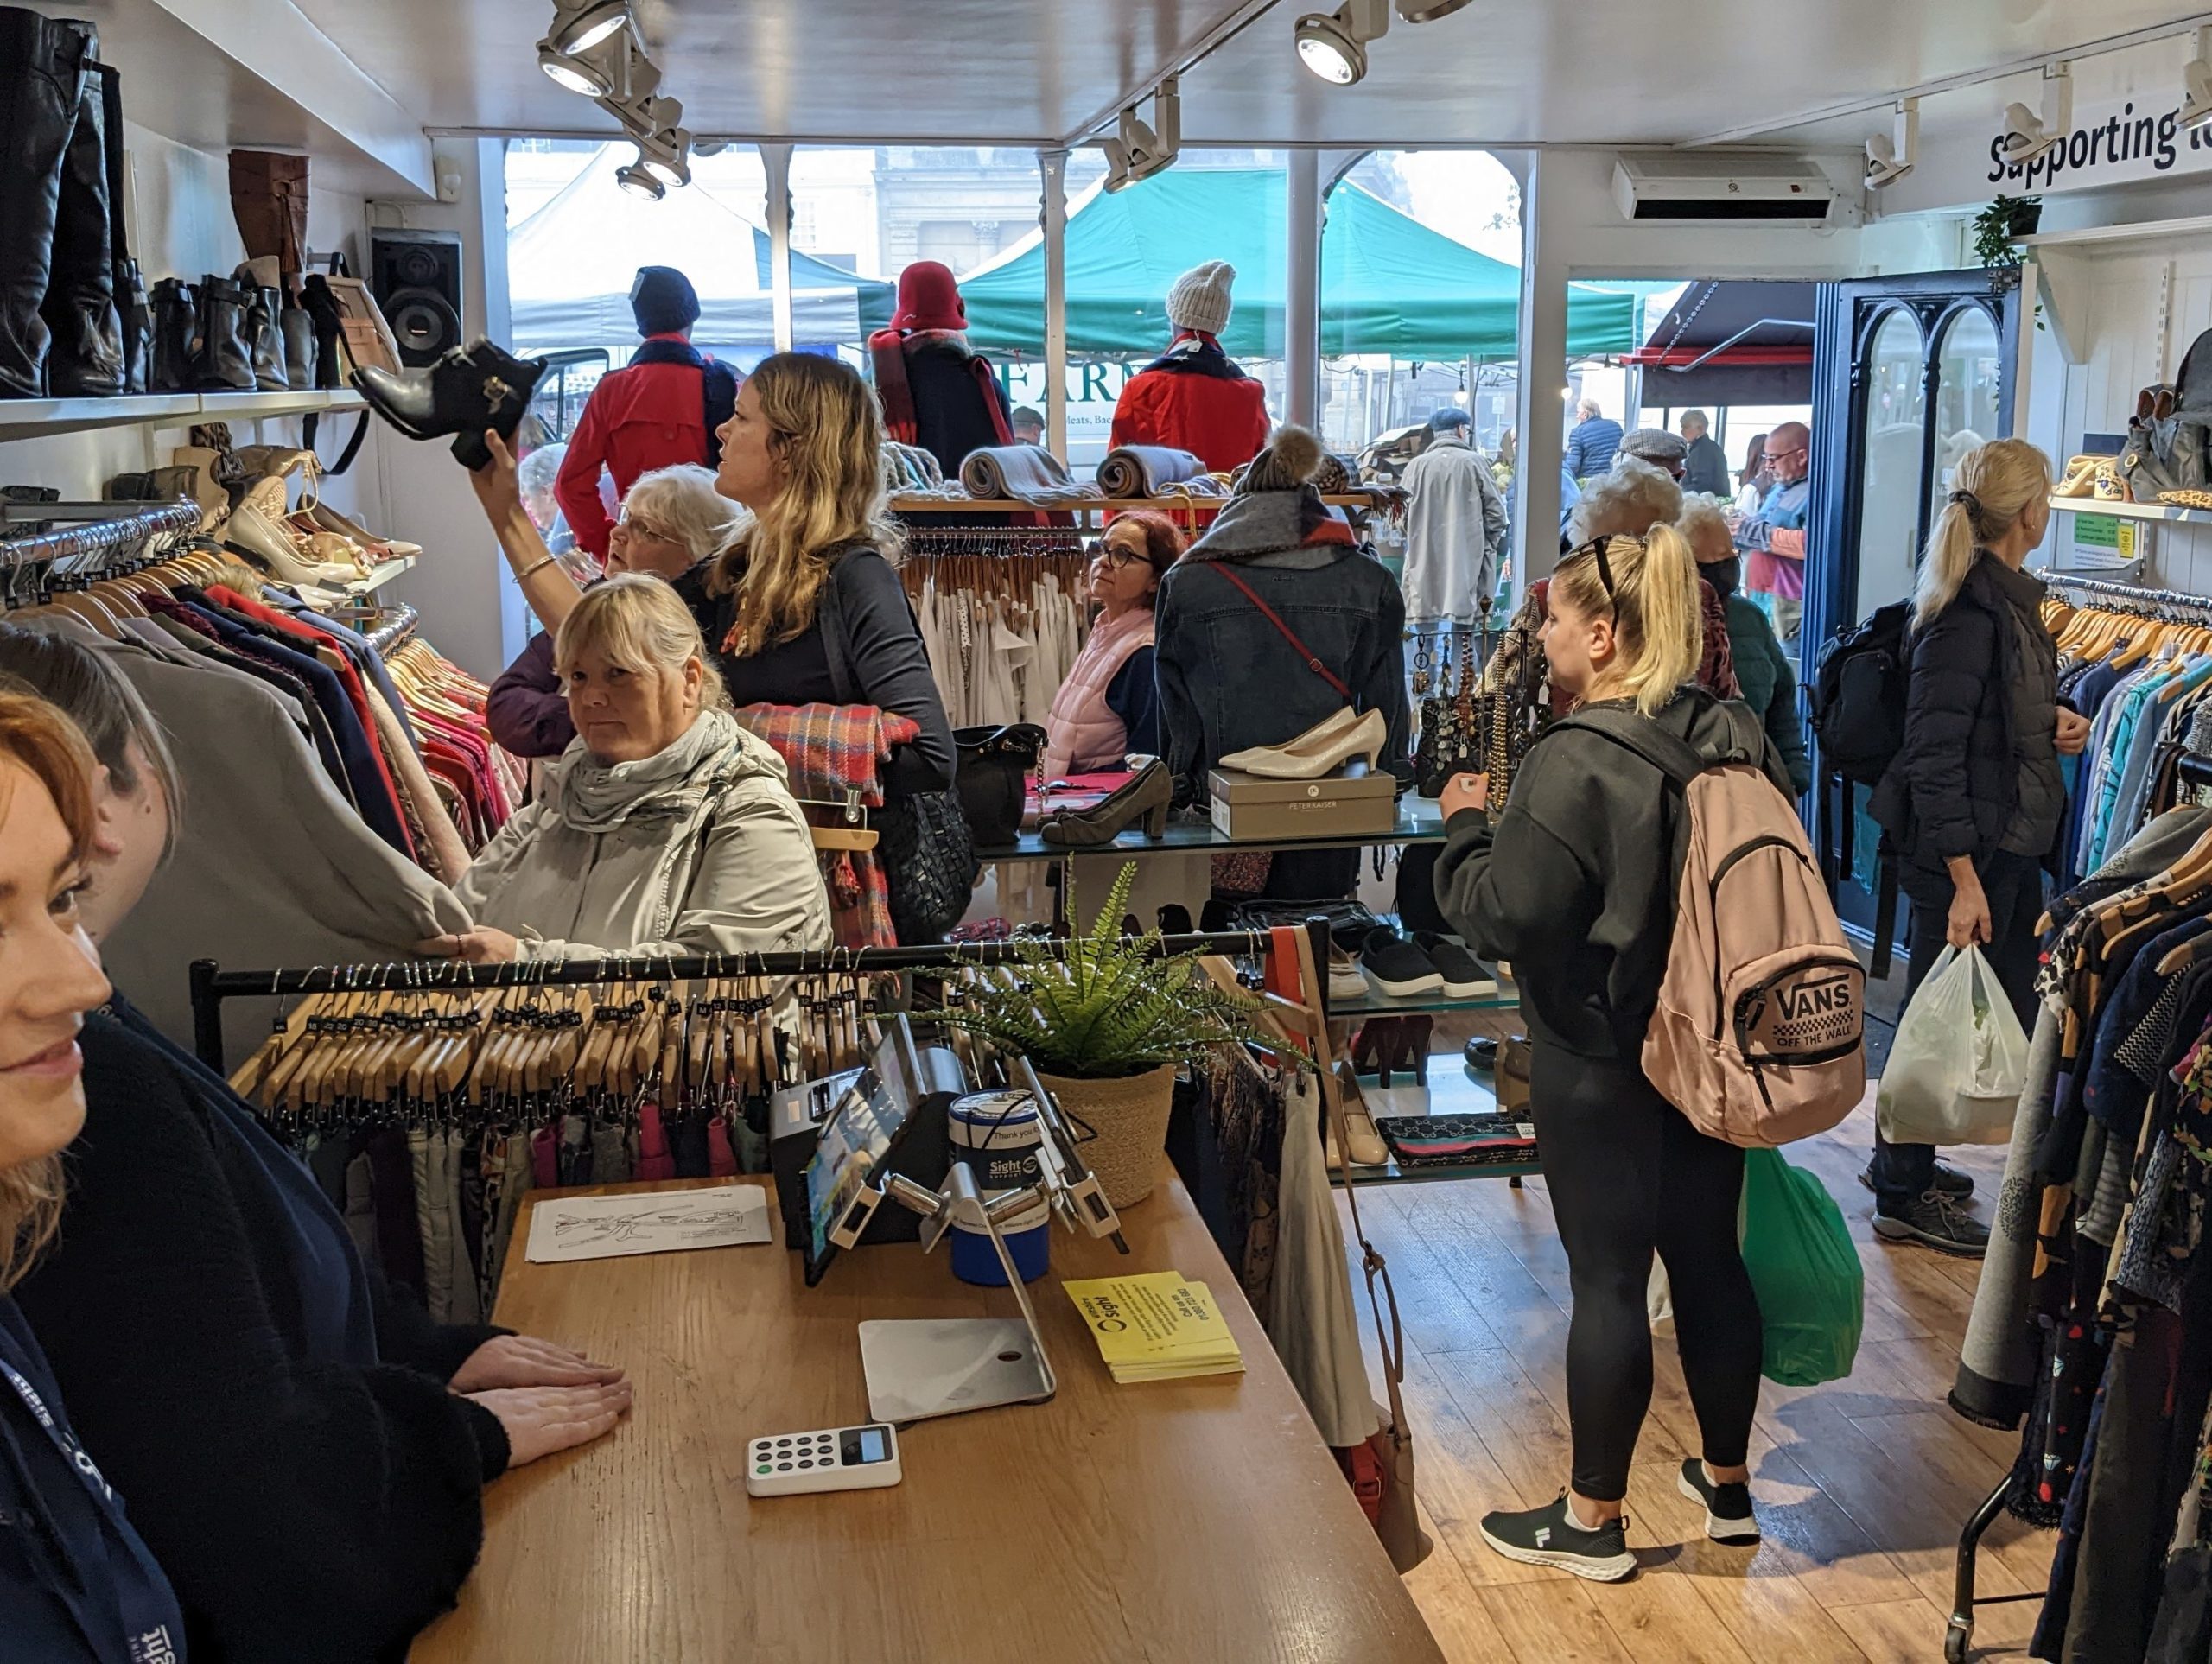 The inside of the shop with our counter and many customers viewing the clothes